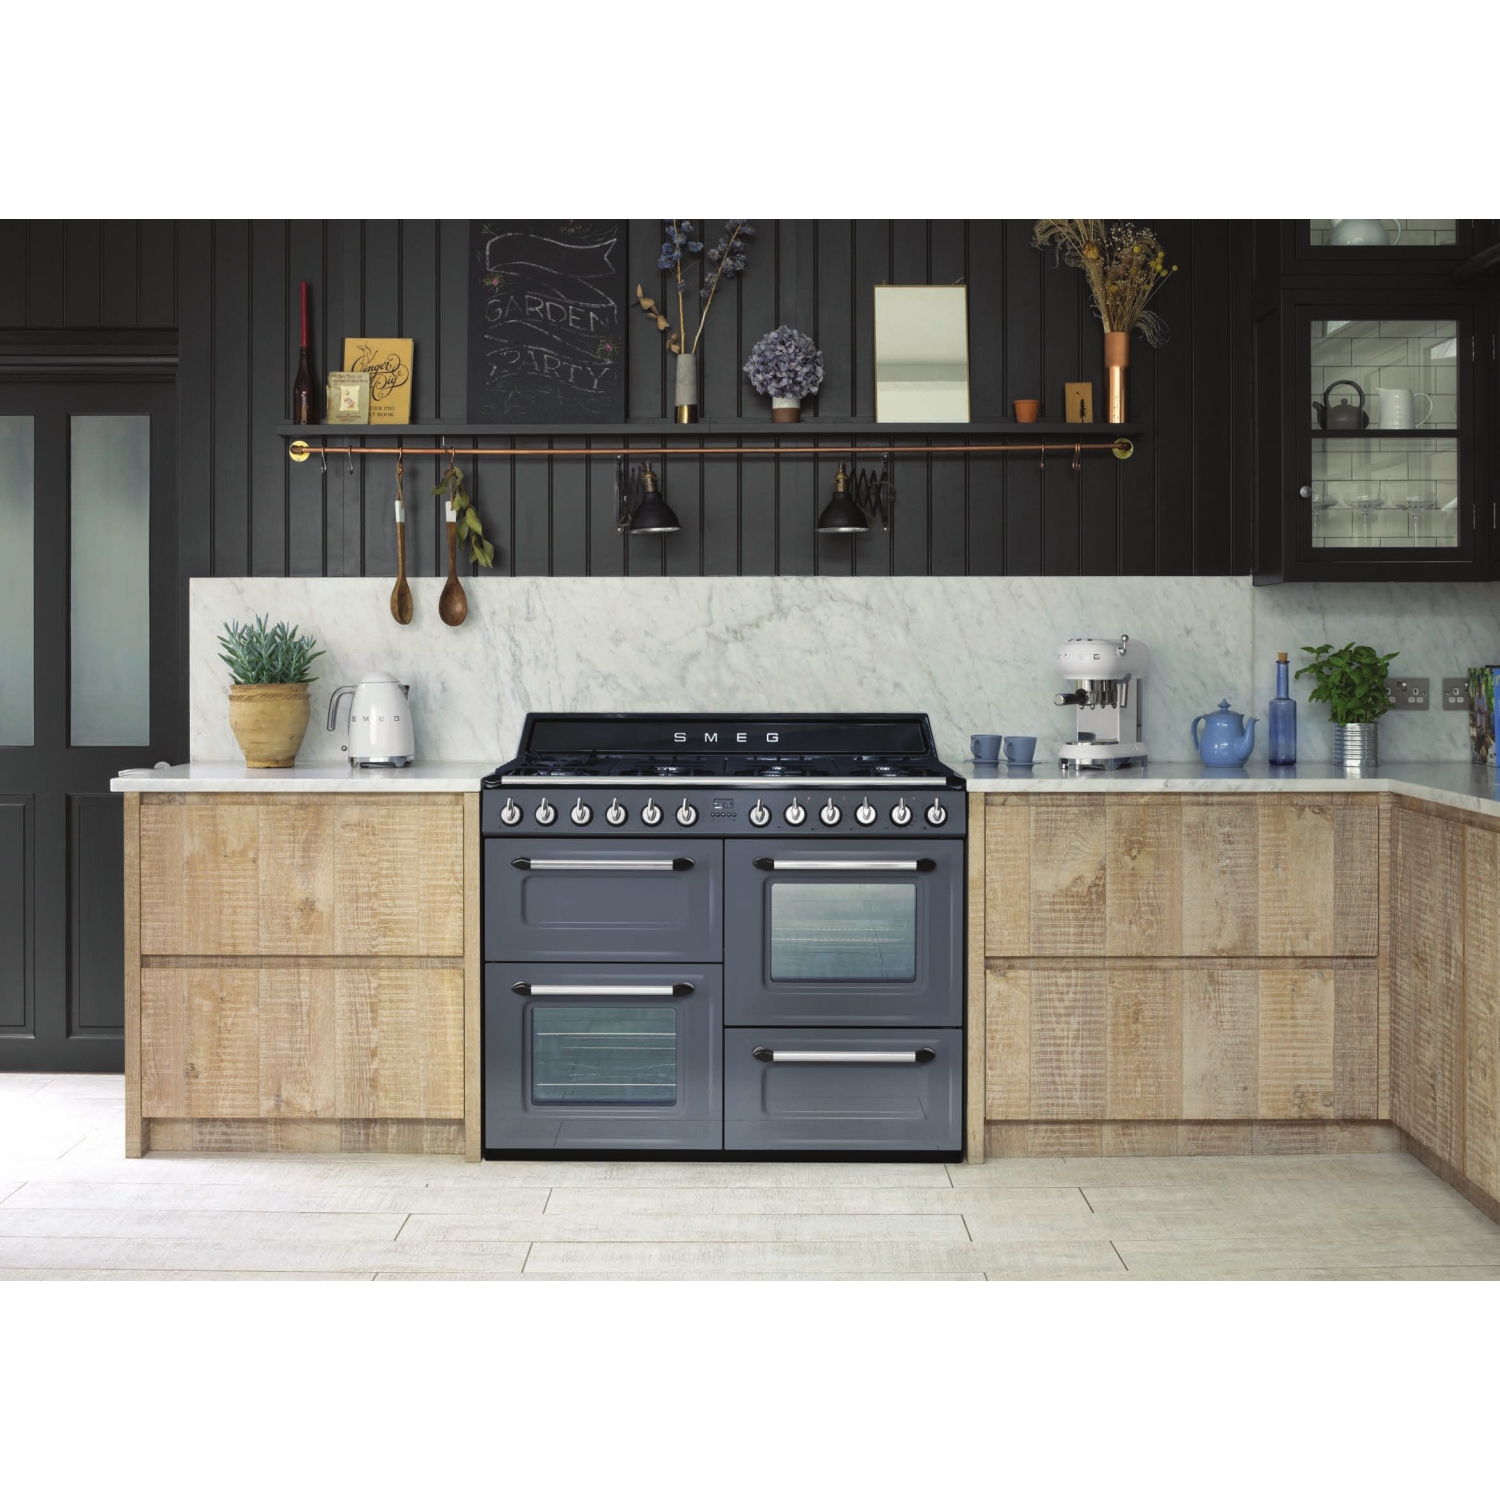 Smeg Cookers  Range Cookers